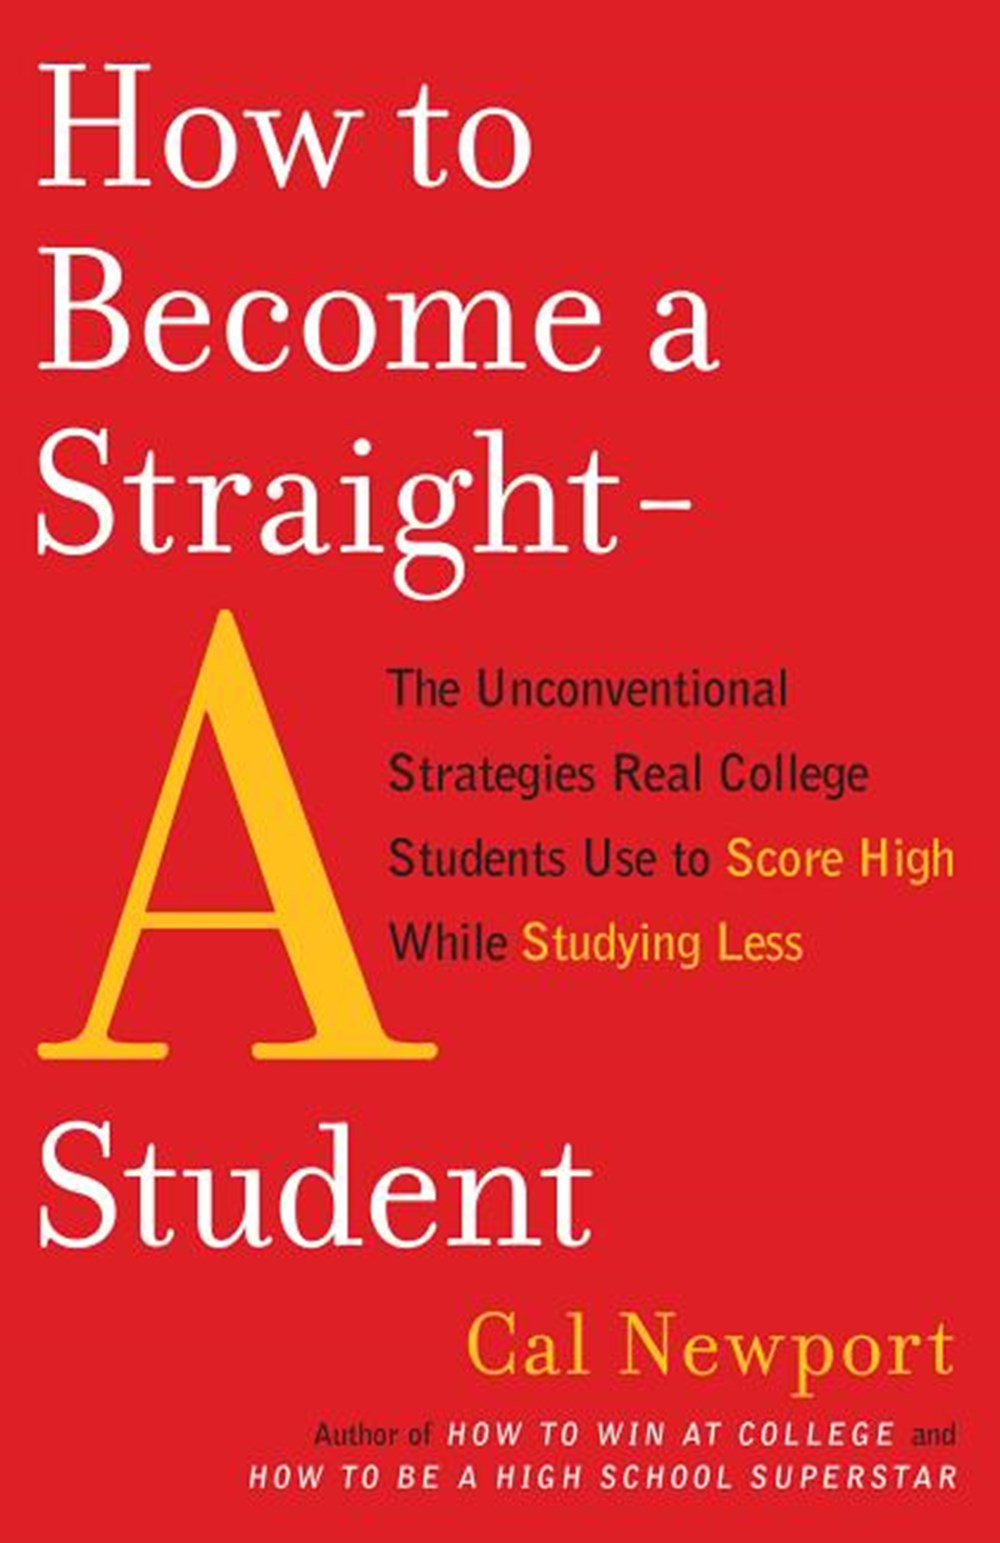 How to Become a Straight-A Student The Unconventional Strategies Real College Students Use to Score 